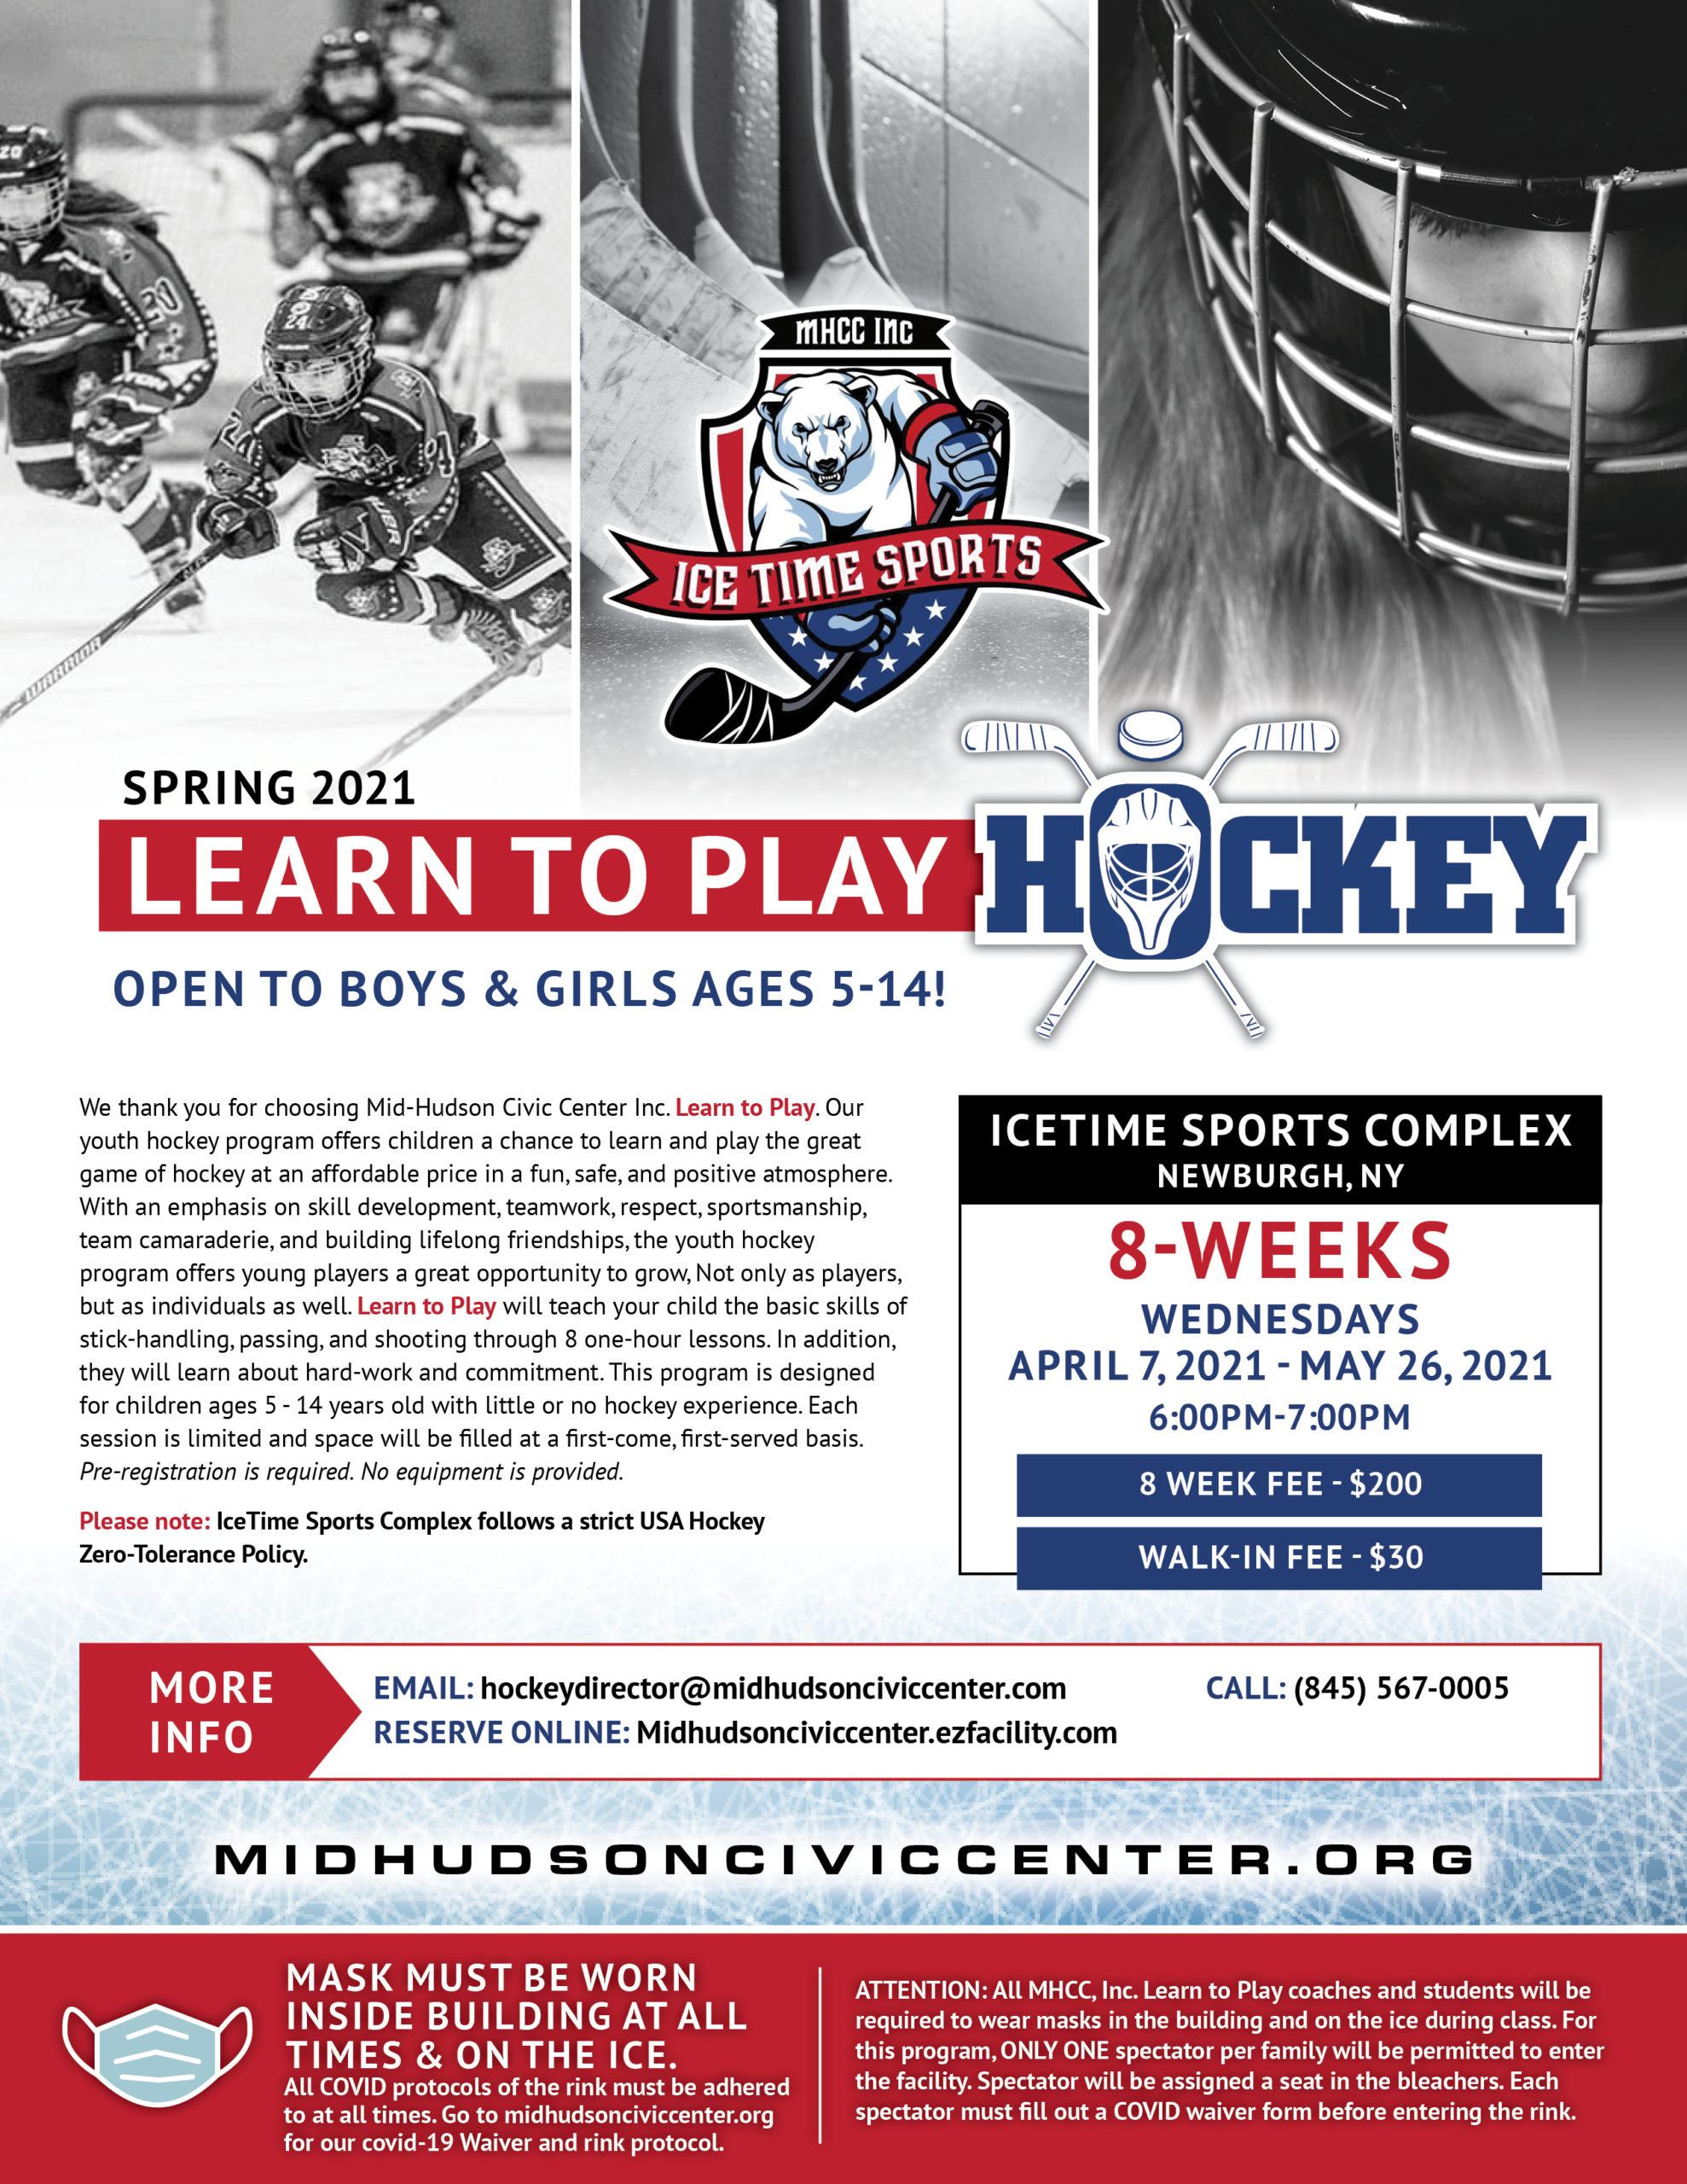 Learn to Play Hockey - April 7